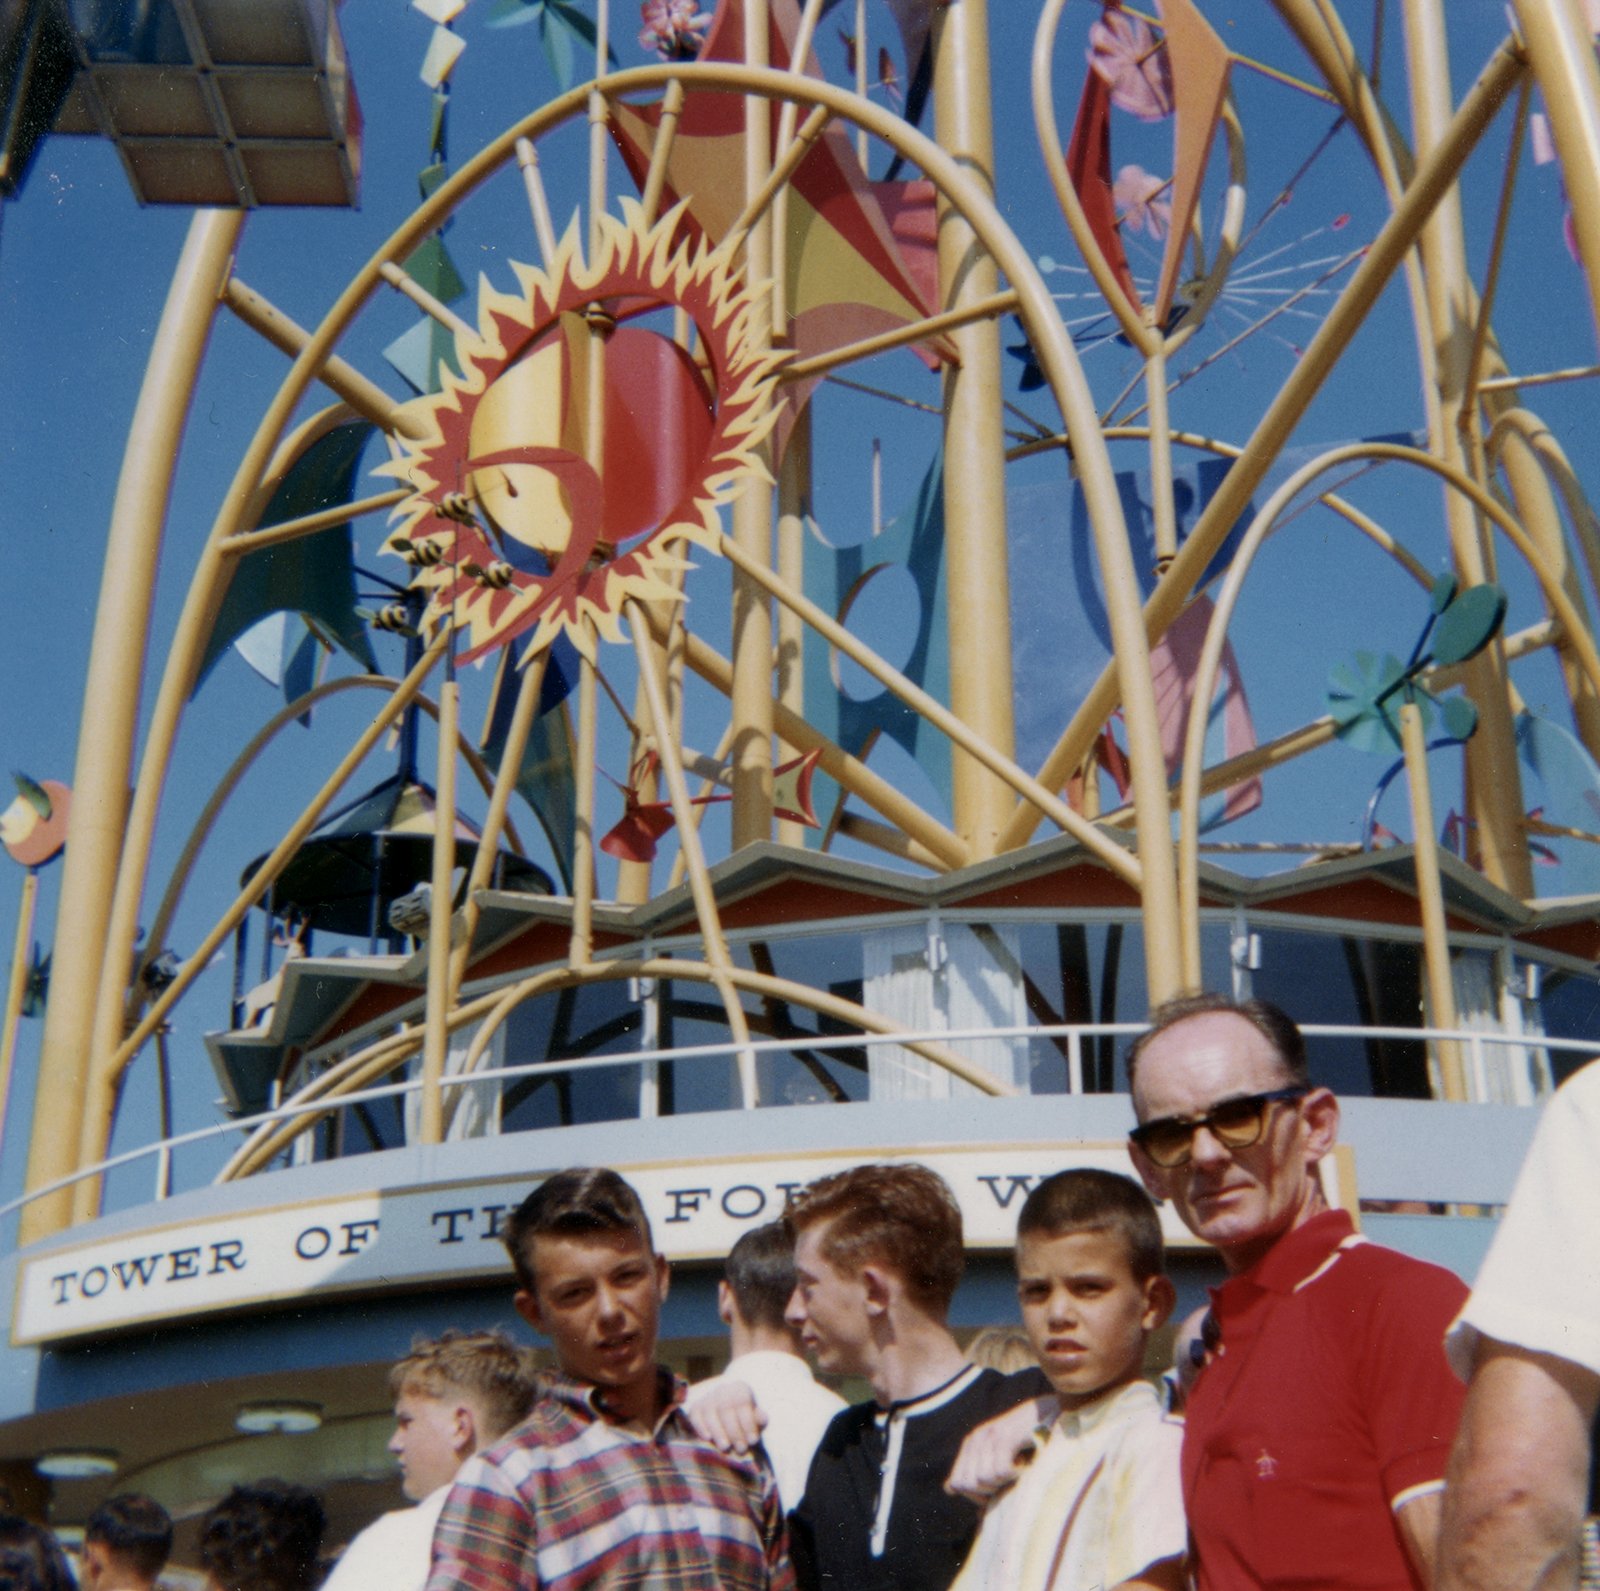 Gerry (middle) with the O’Bryens and his uncle Jack (right) at the New York World’s Fair, 1964